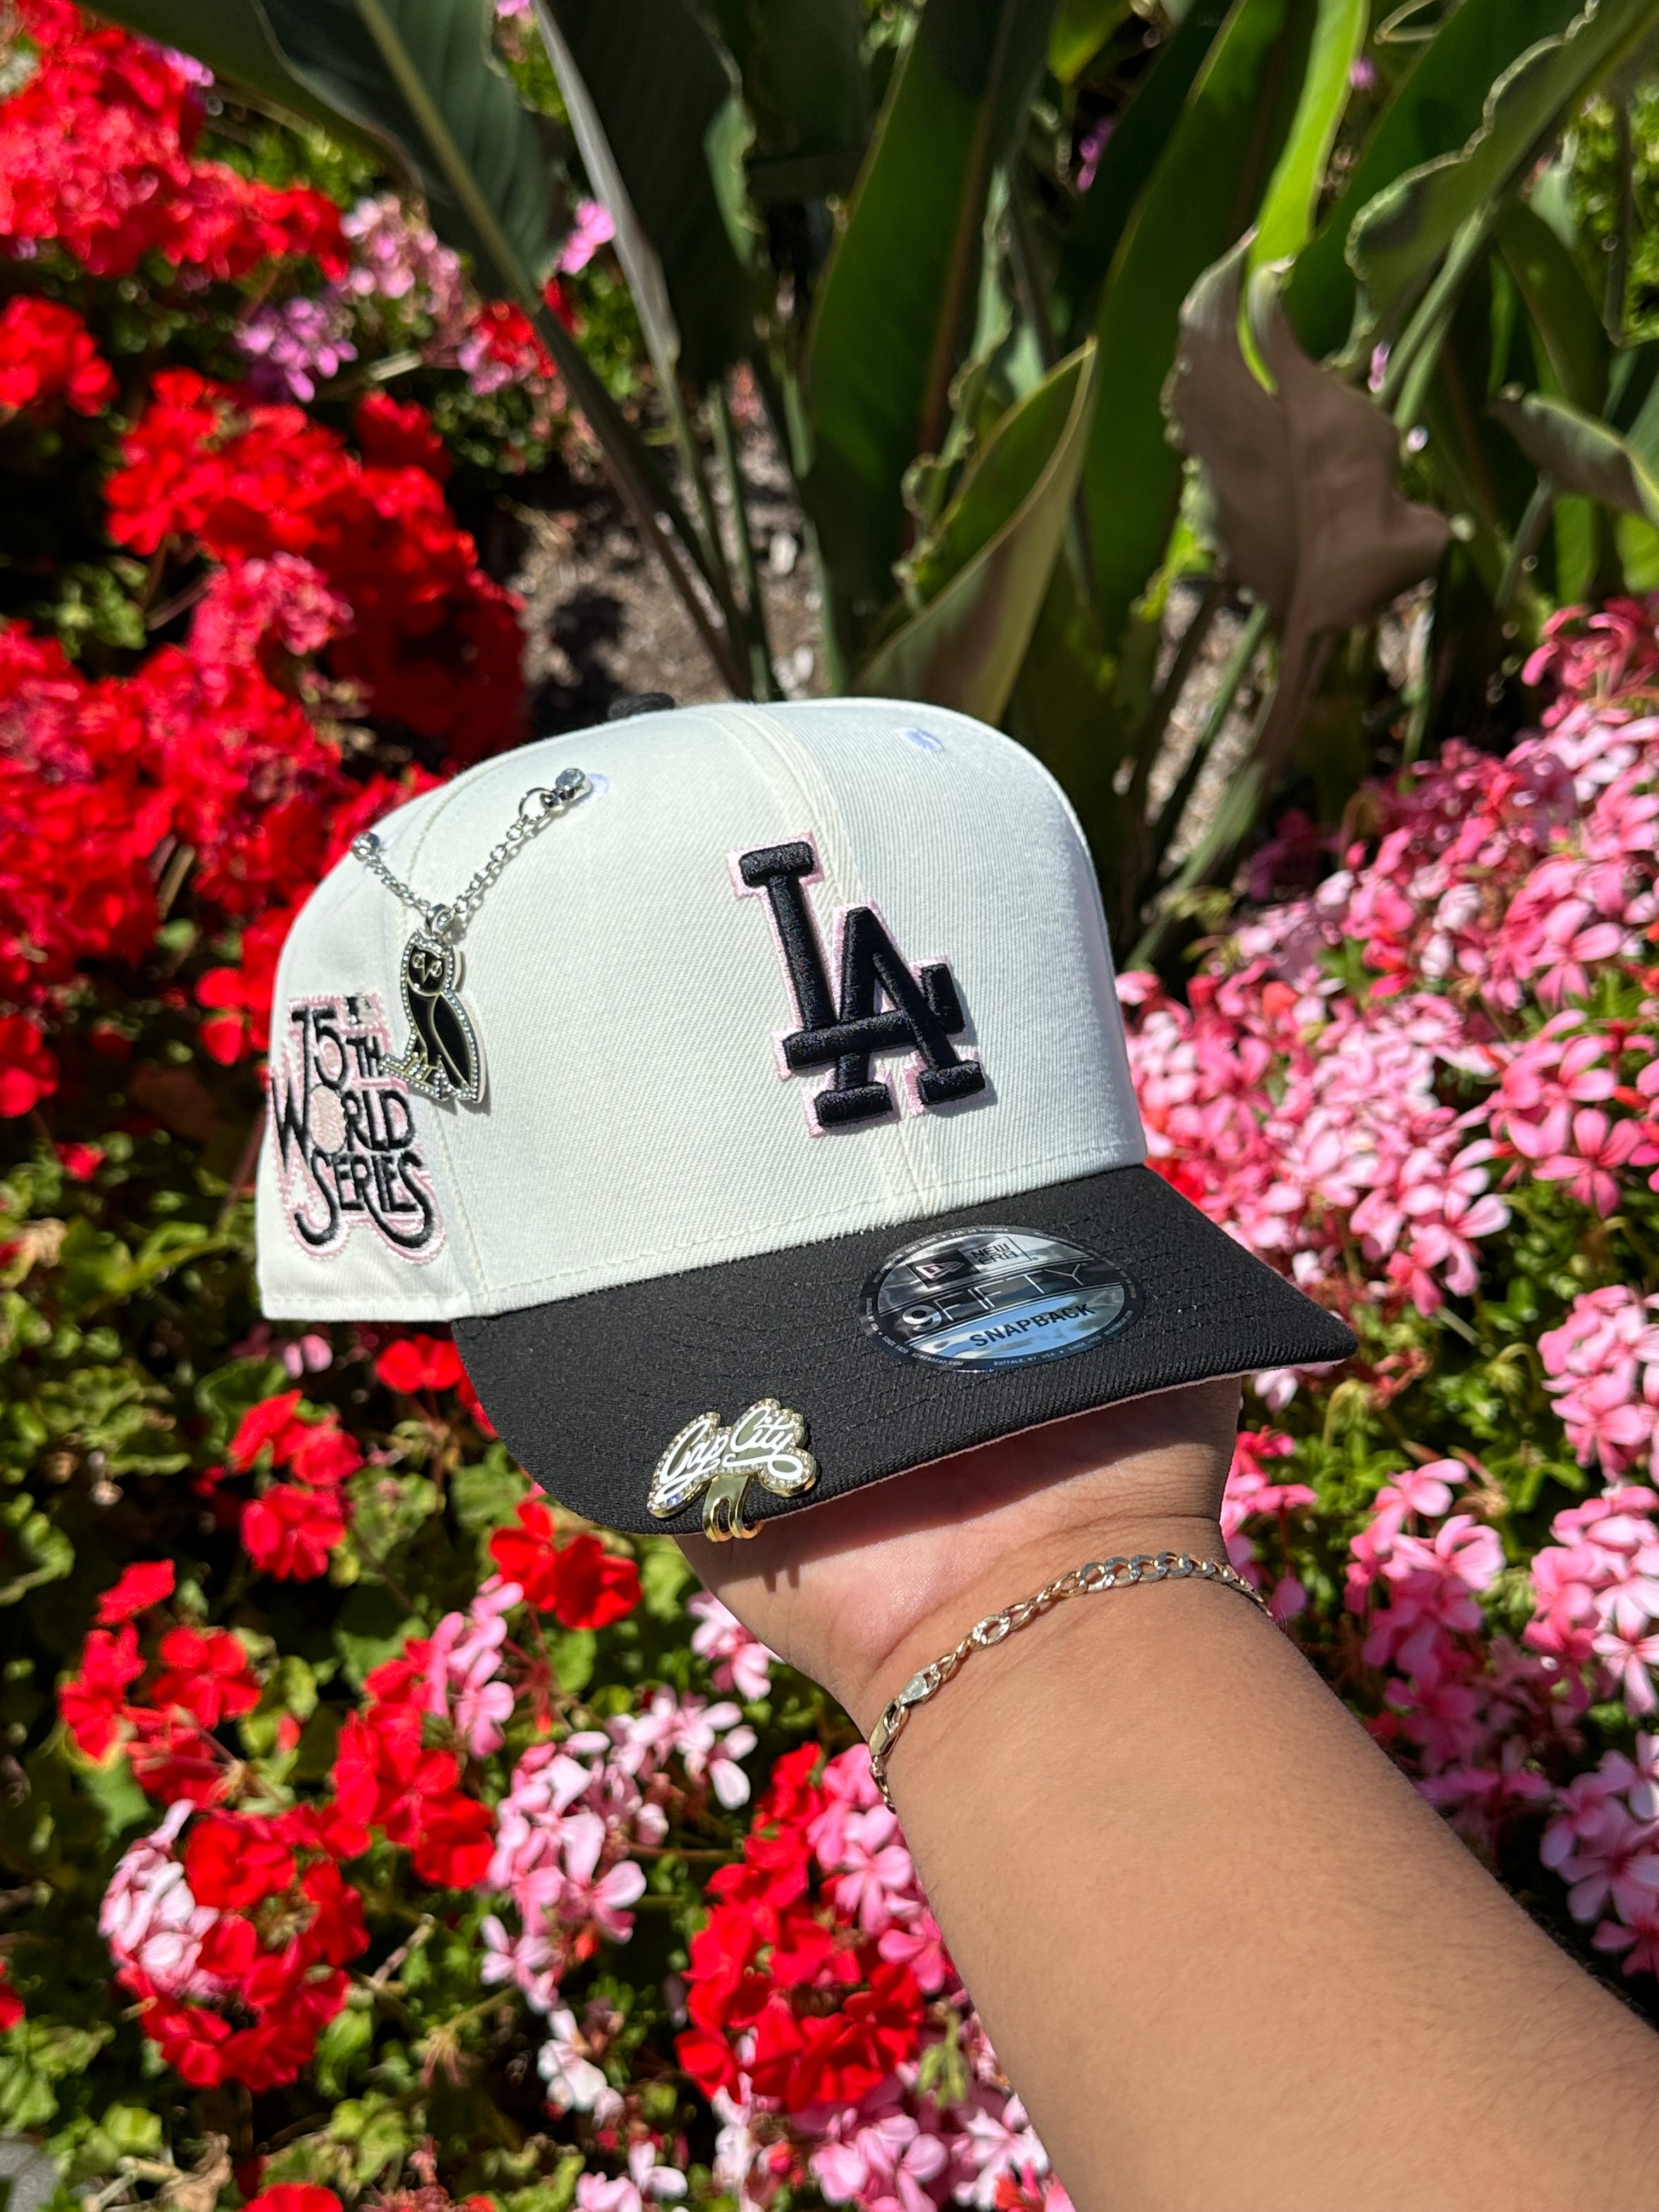 NEW ERA EXCLUSIVE 9FIFTY CHROME WHITE/BLACK LOS ANGELES DODGERS SNAPBACK W/ 75TH WORLD SERIES PATCH